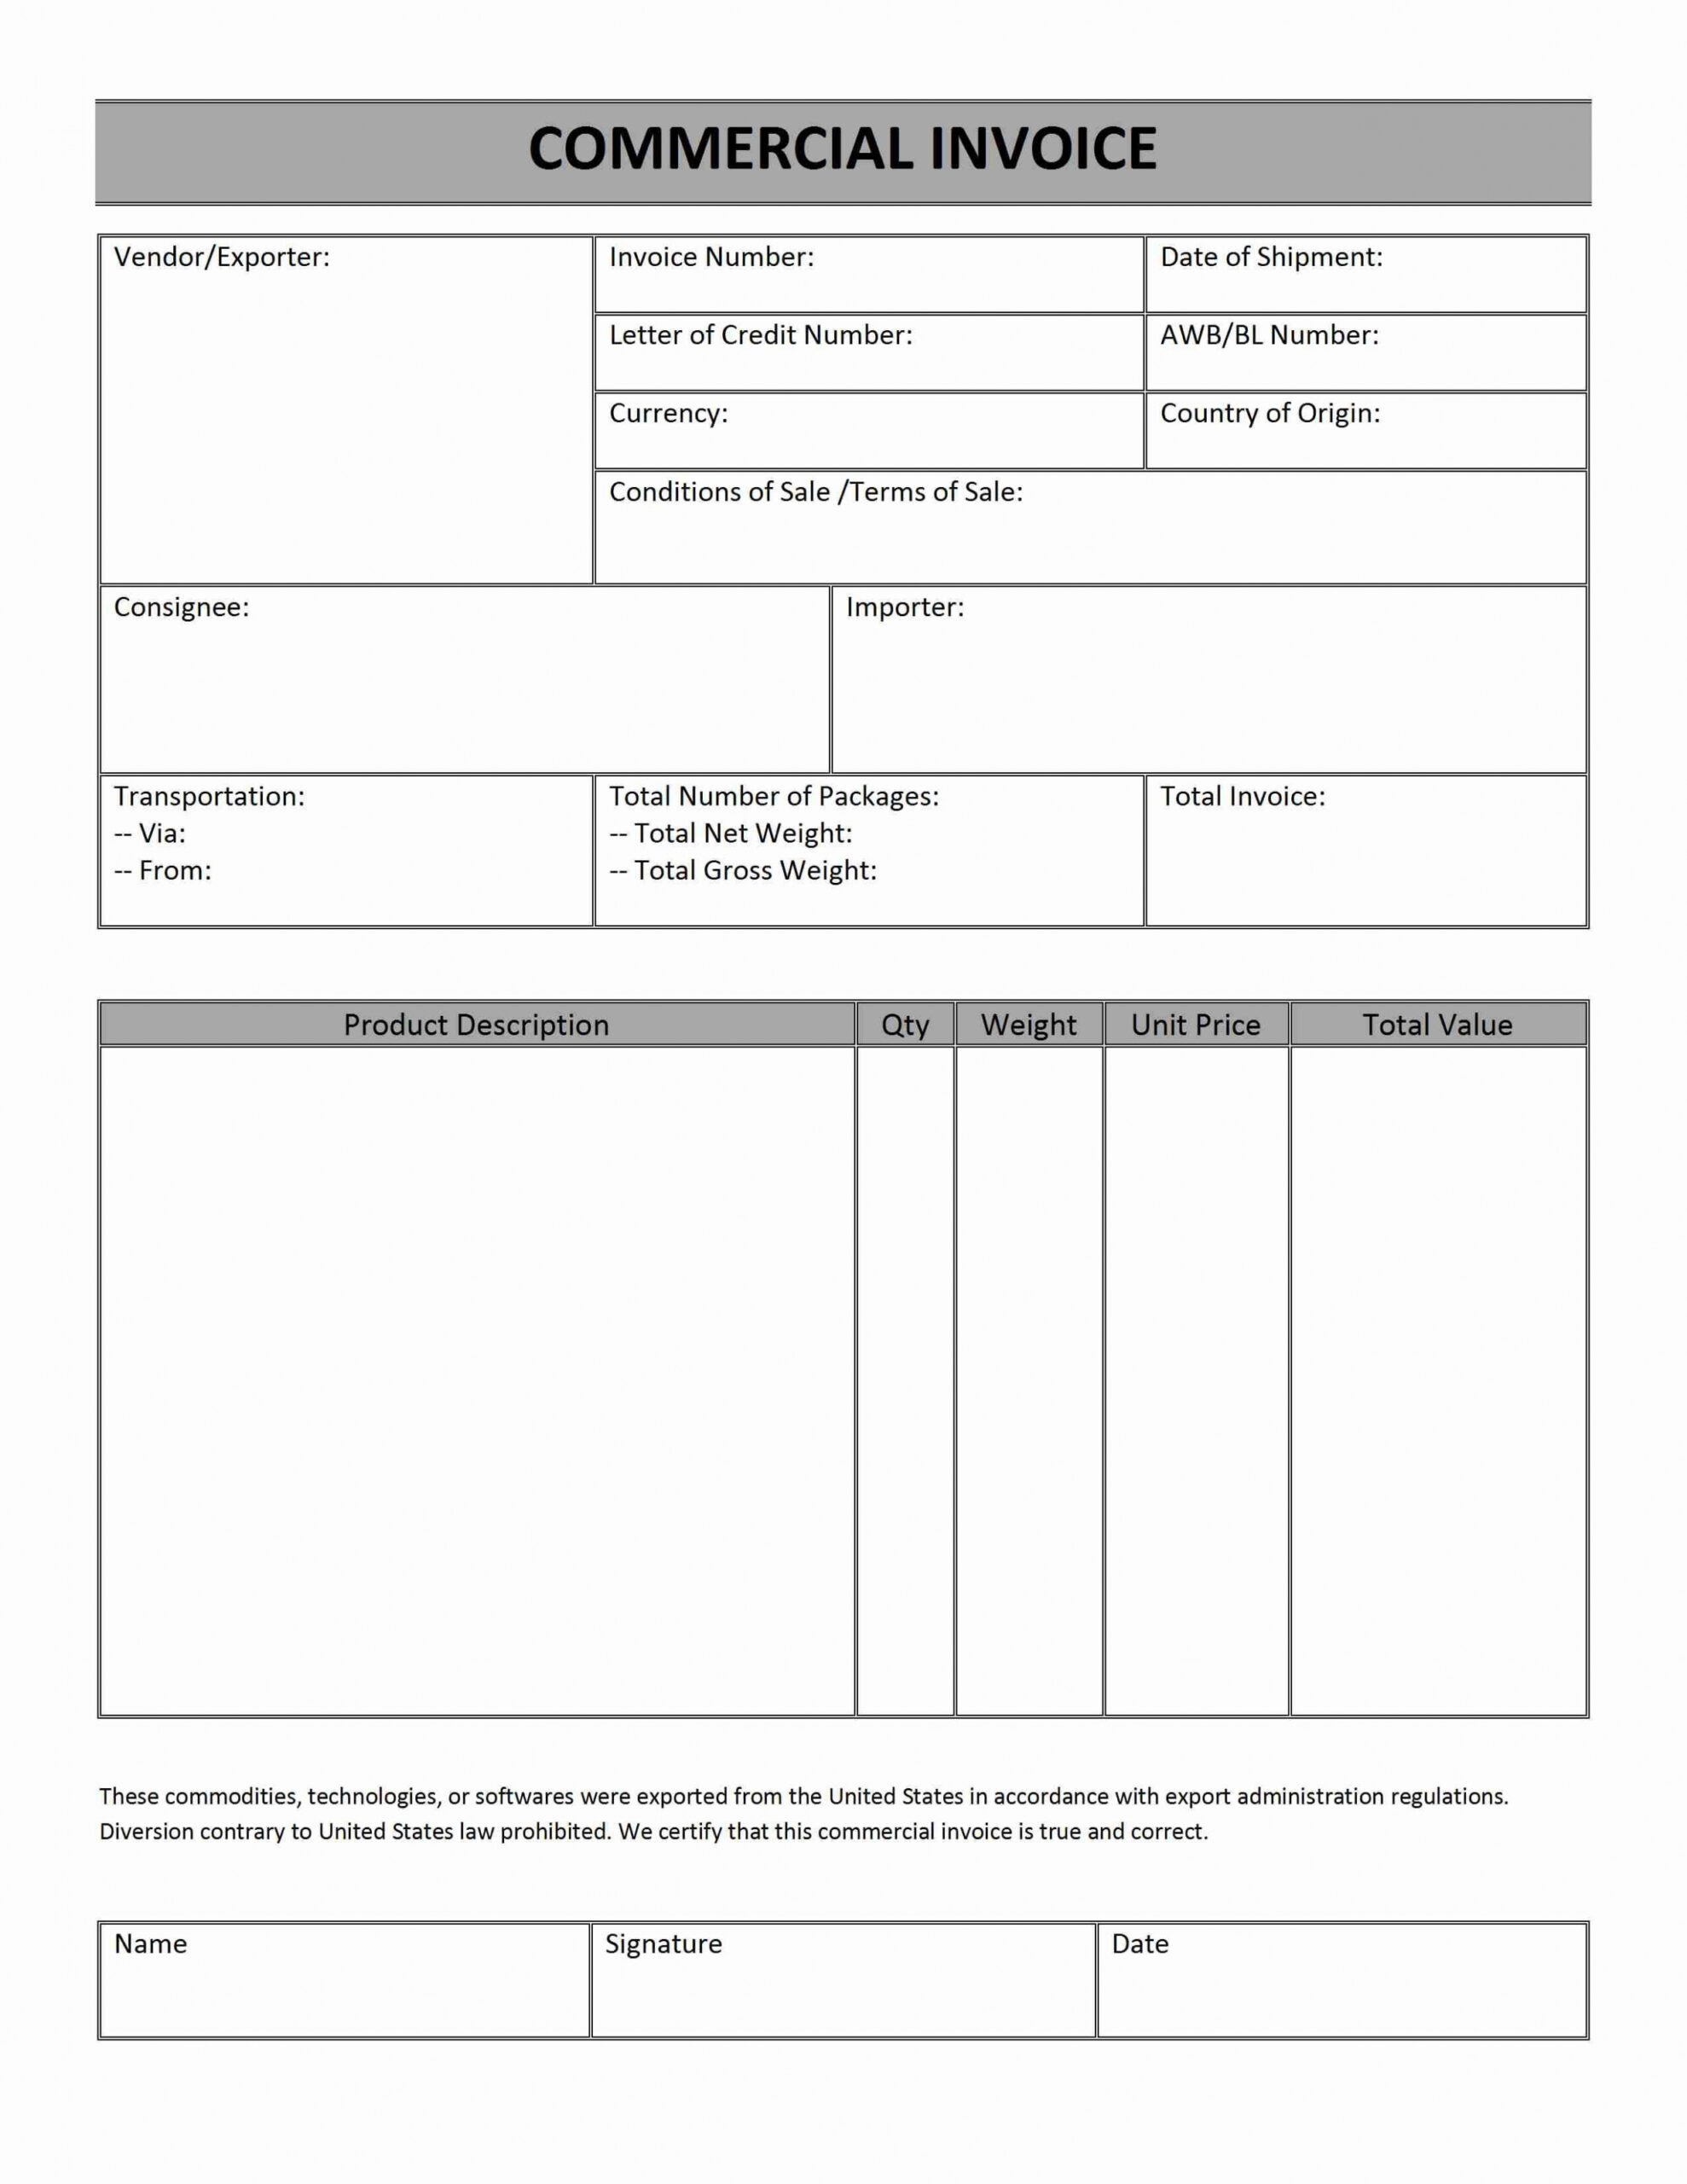 Sample International Commercial Invoice Template PPT